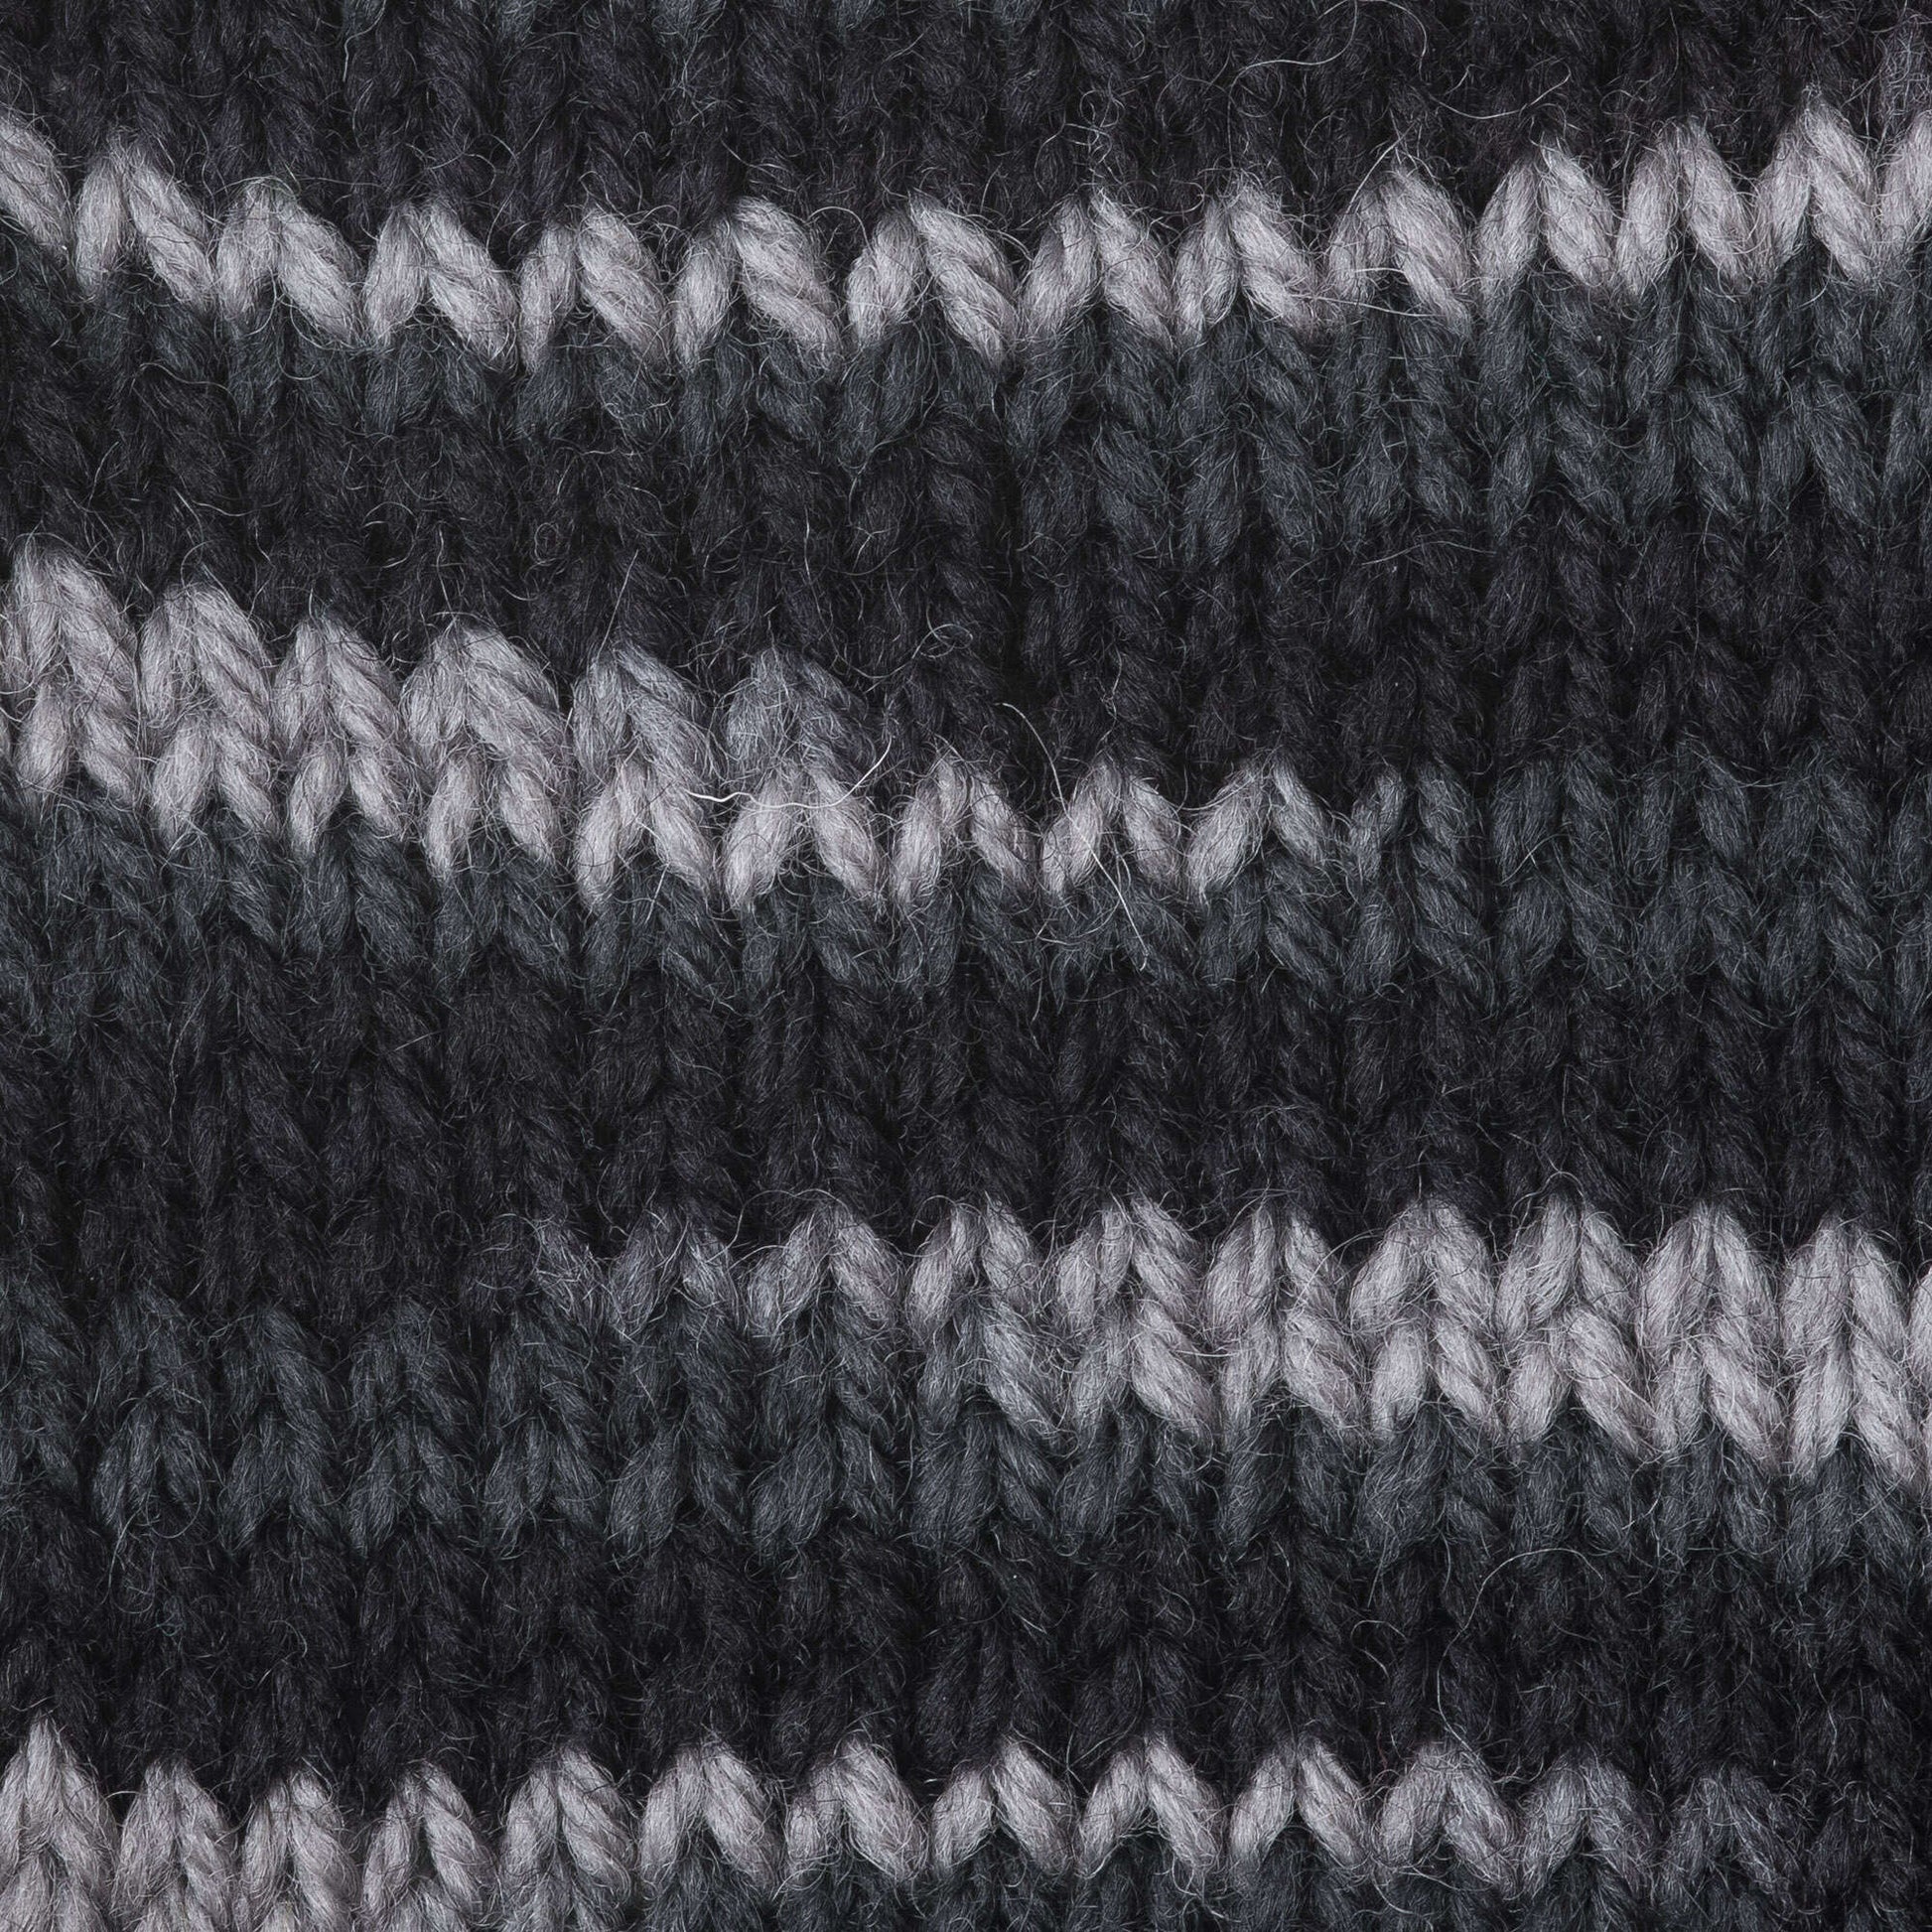 Patons Classic Wool Worsted Yarn - Discontinued Shades Shades of Gray